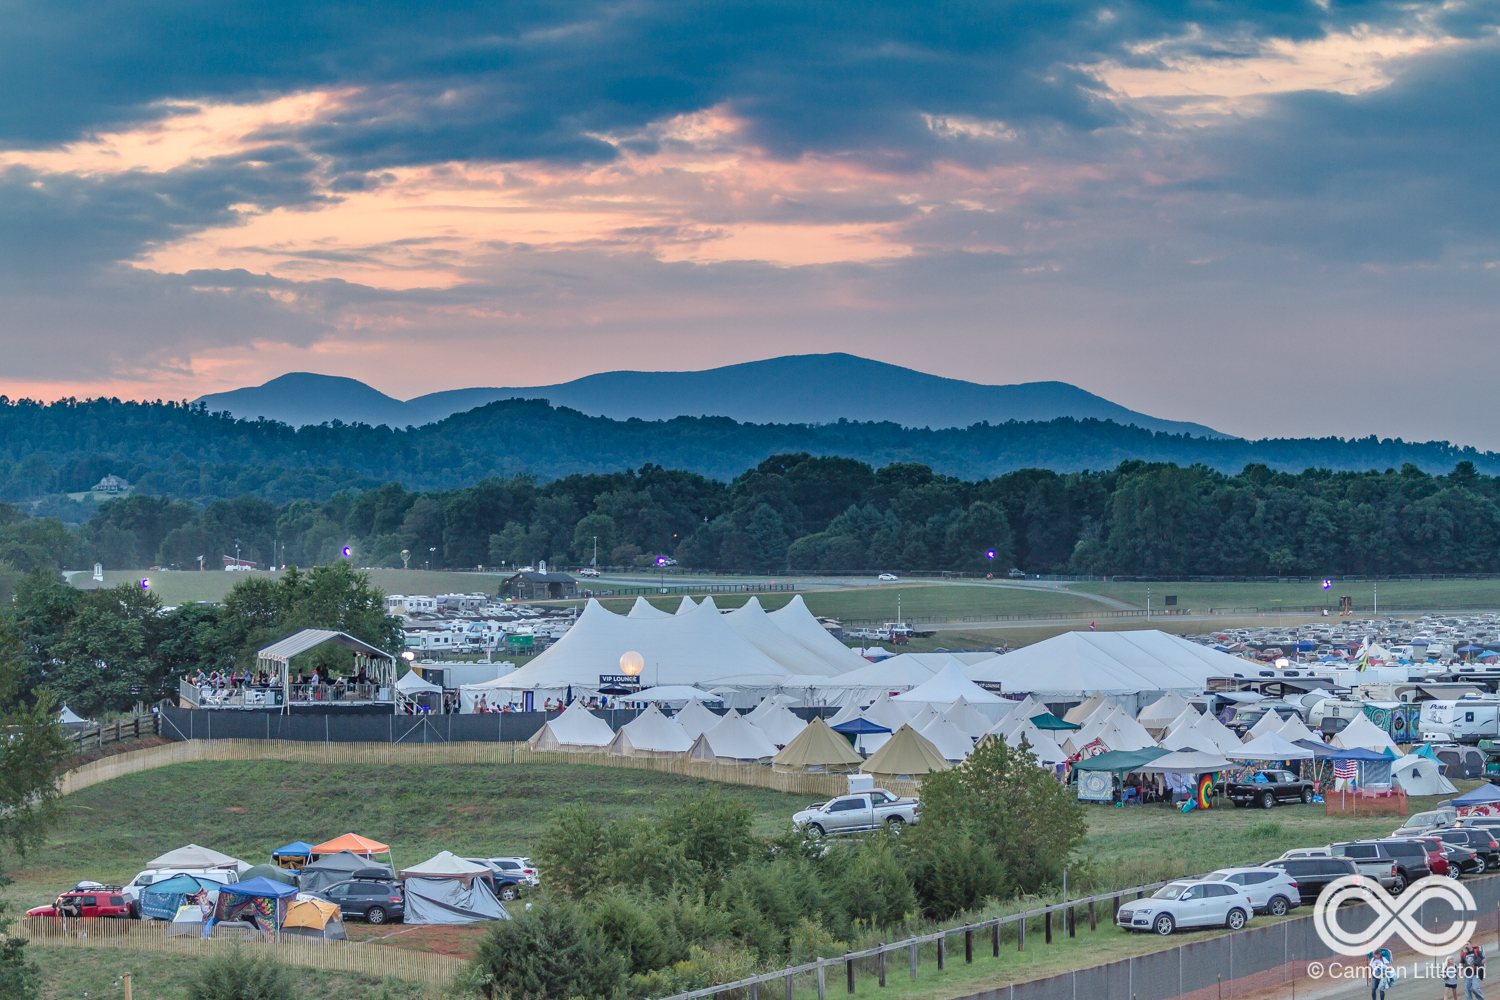 Here’s How LOCKN’ is the Living Festival